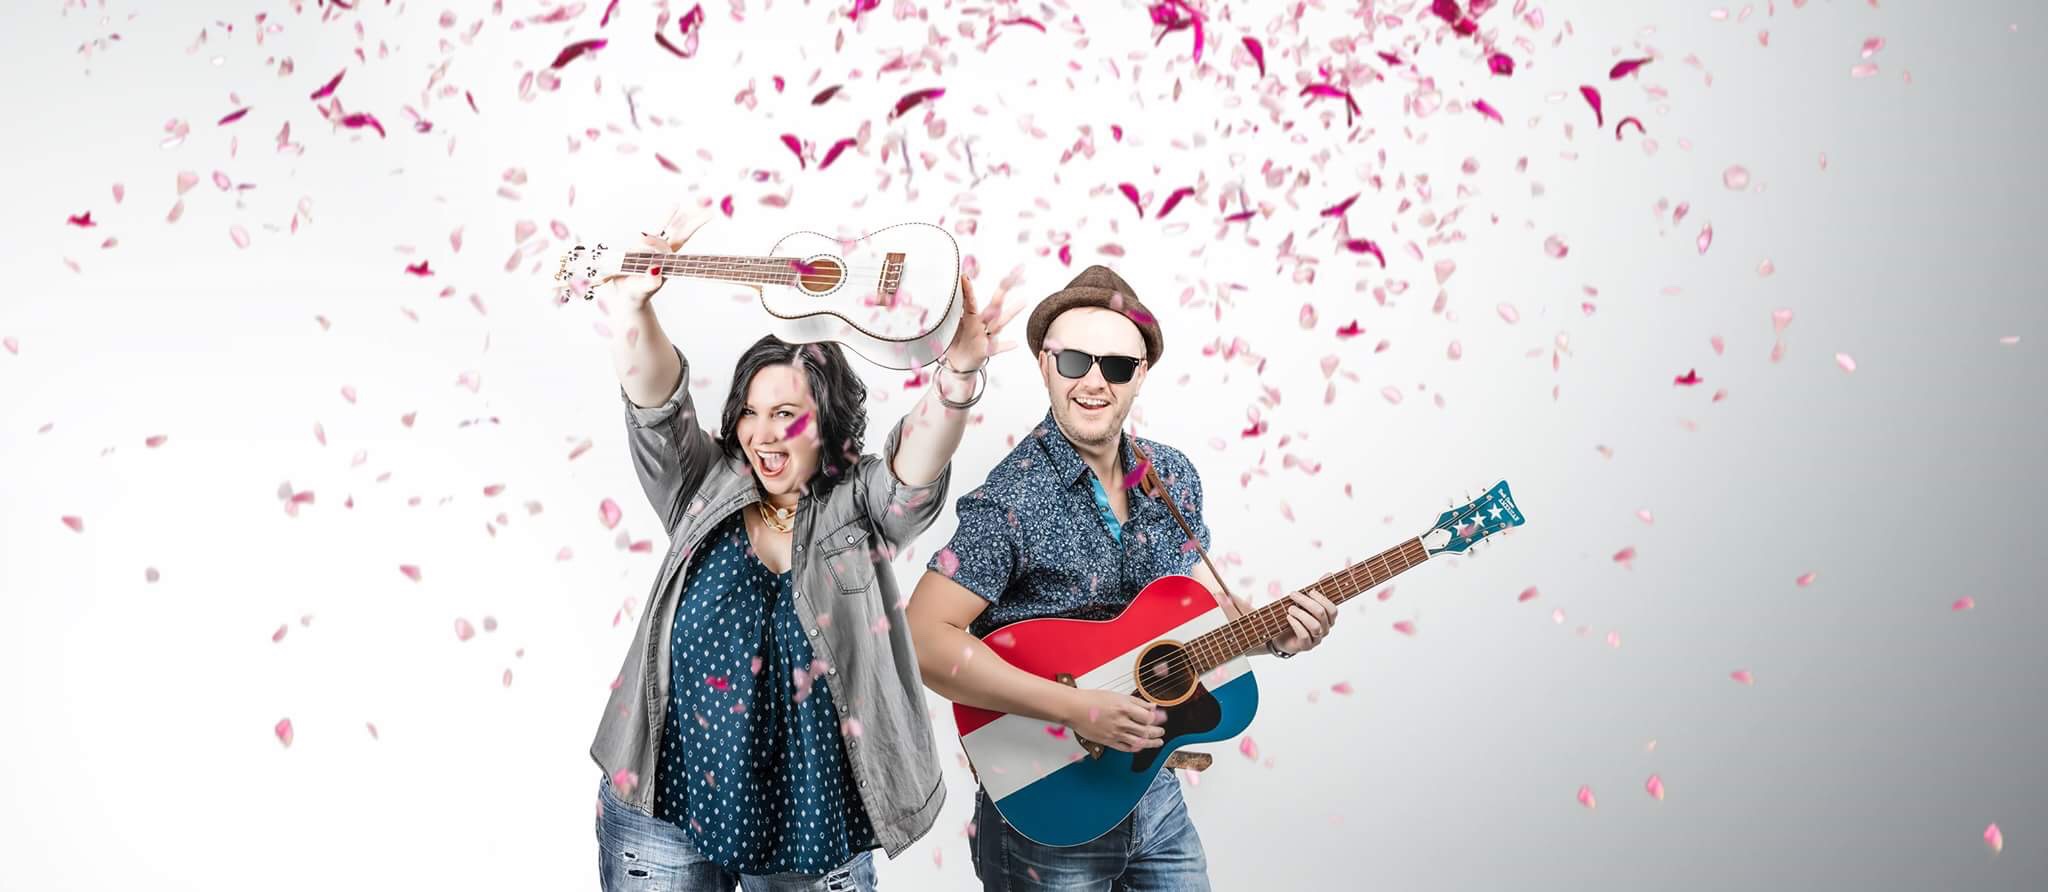 A woman joyfully holds up a ukulele, and a man in hat and sun glasses plays the guitar. Pink confetti explodes behind them. 